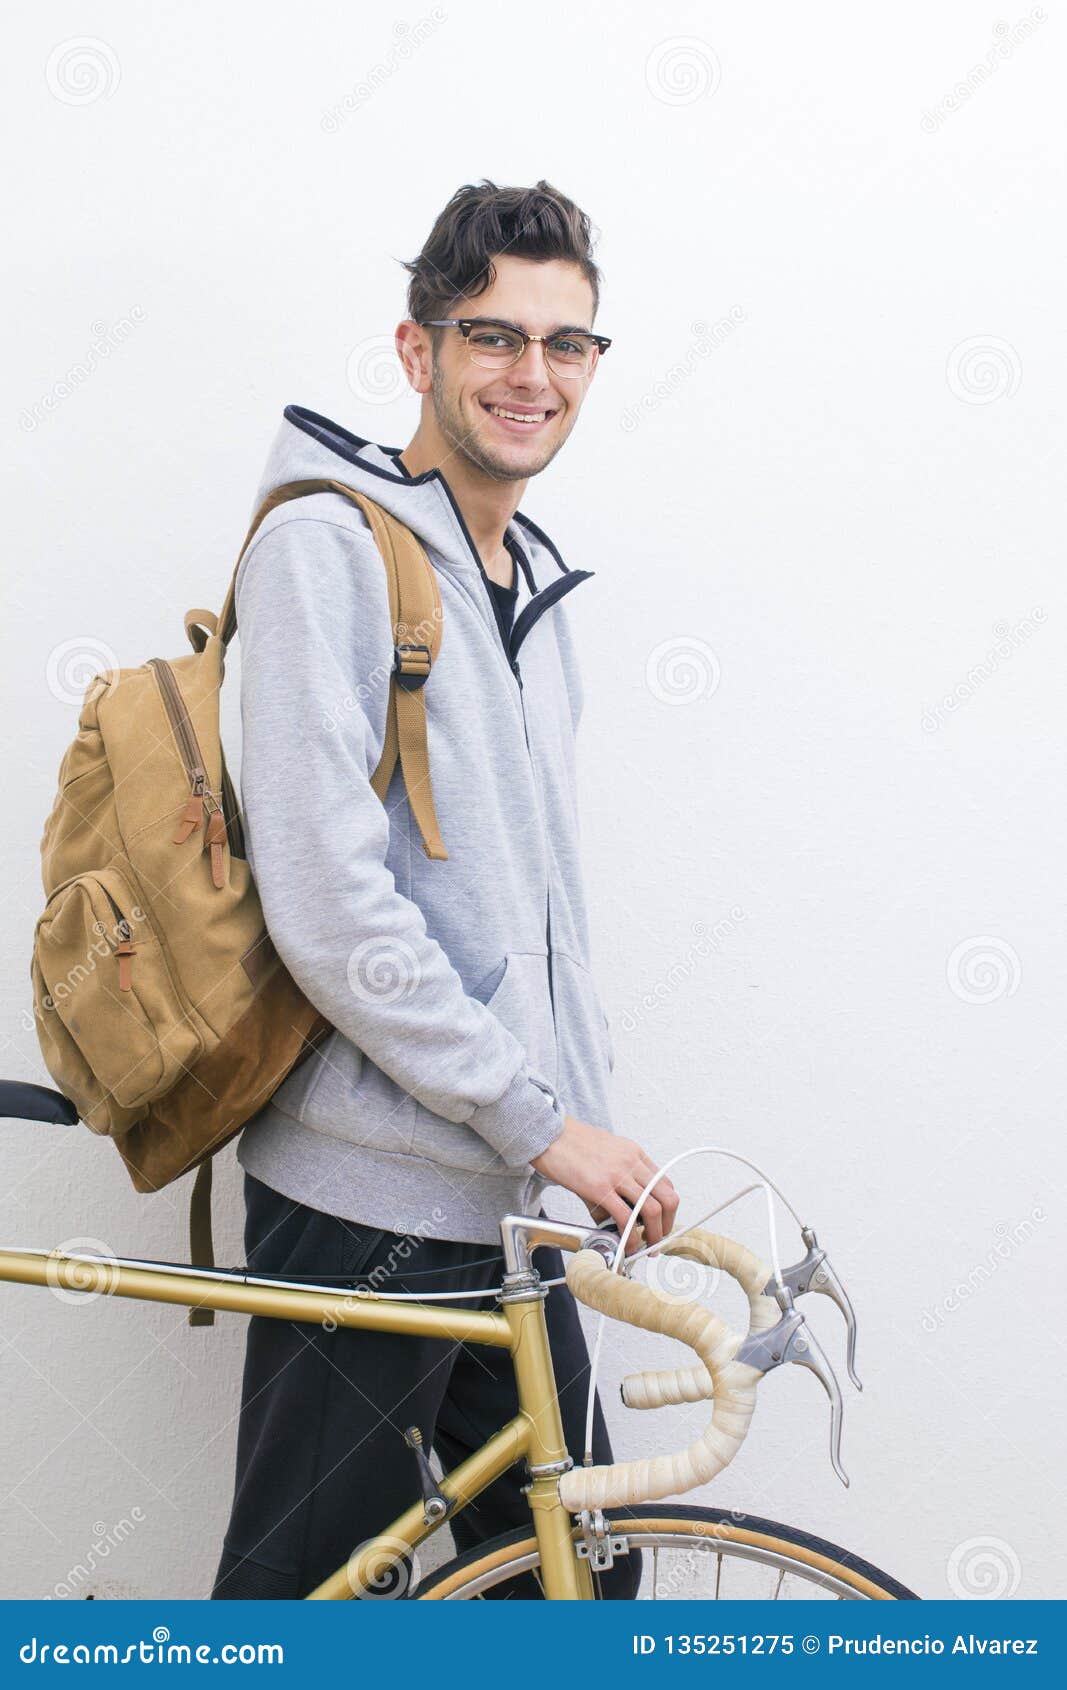 Young with Backpack and Bicycle Stock Image - Image of bike, backpack ...